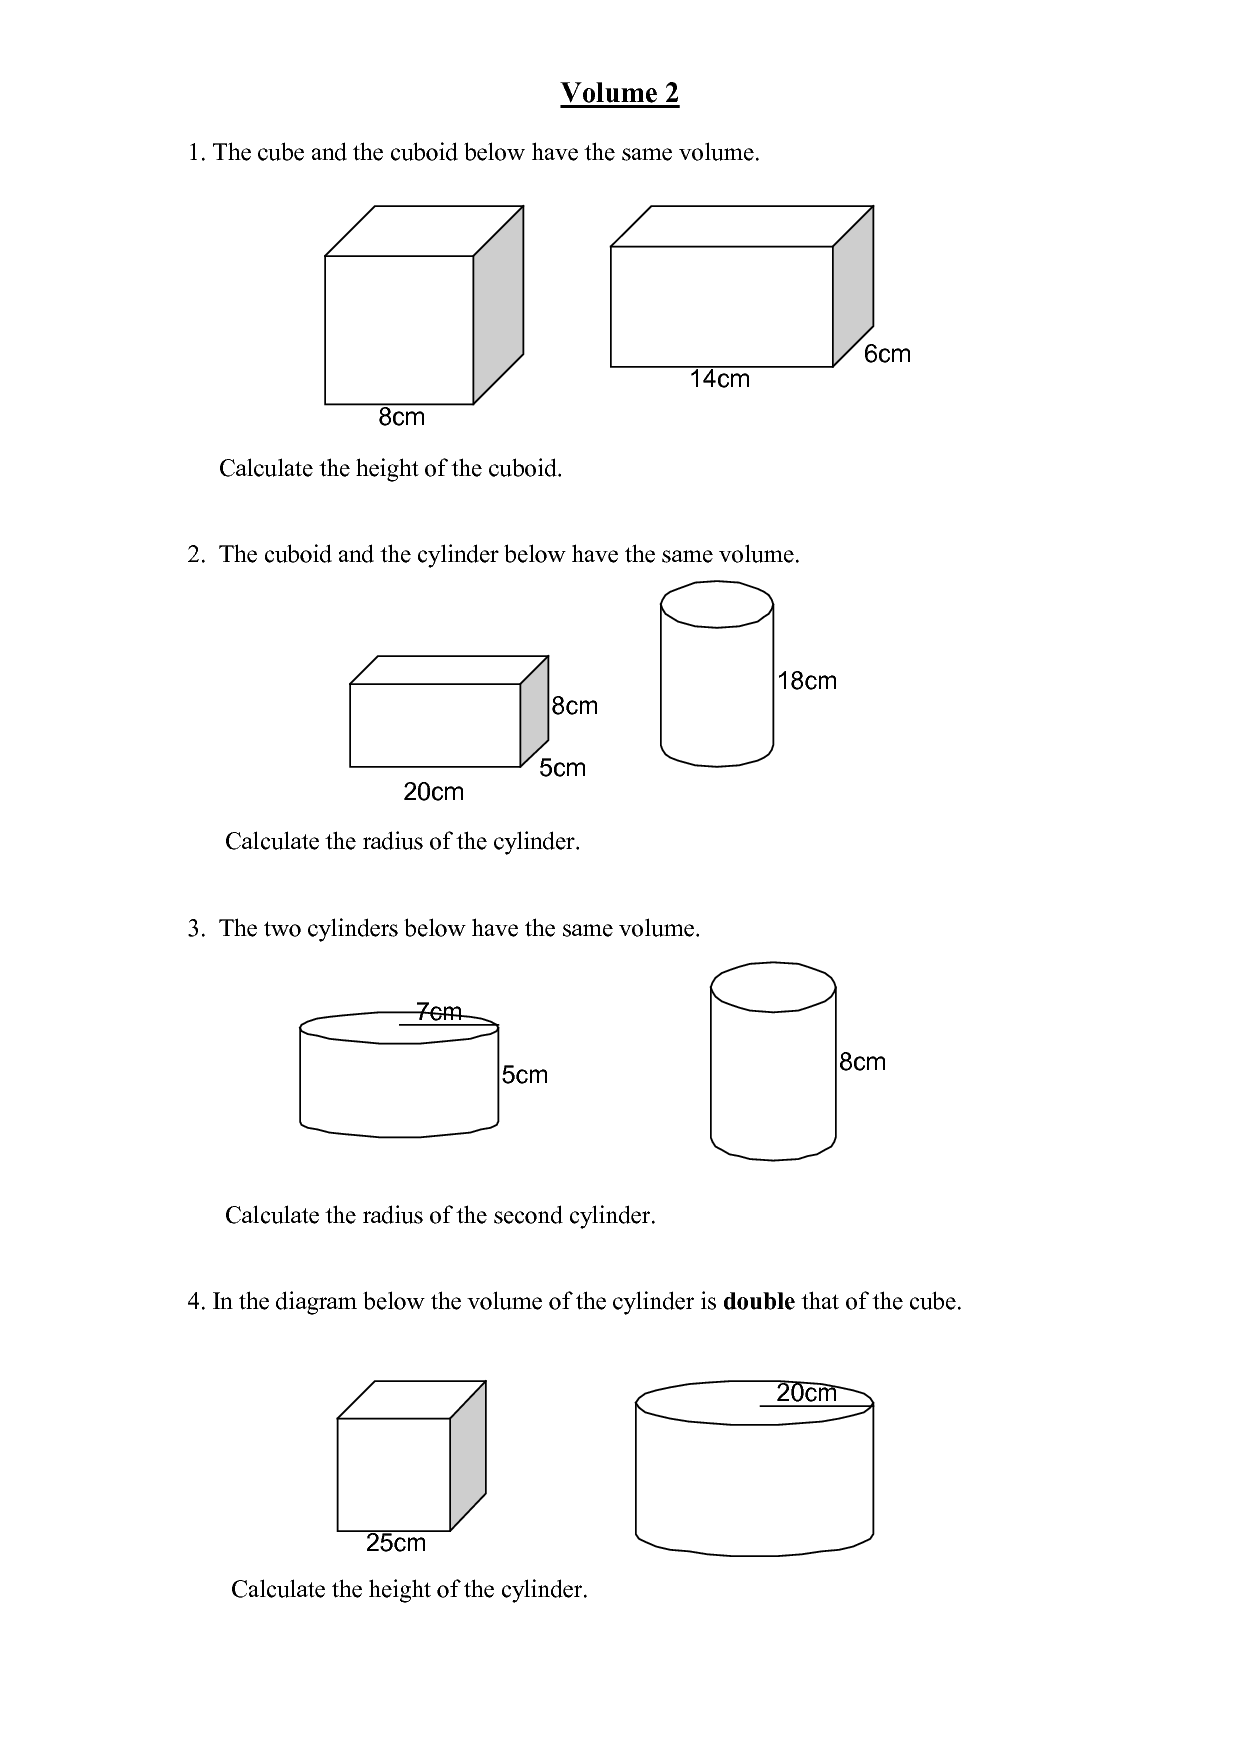 prisms-and-cylinders-worksheet-free-download-goodimg-co